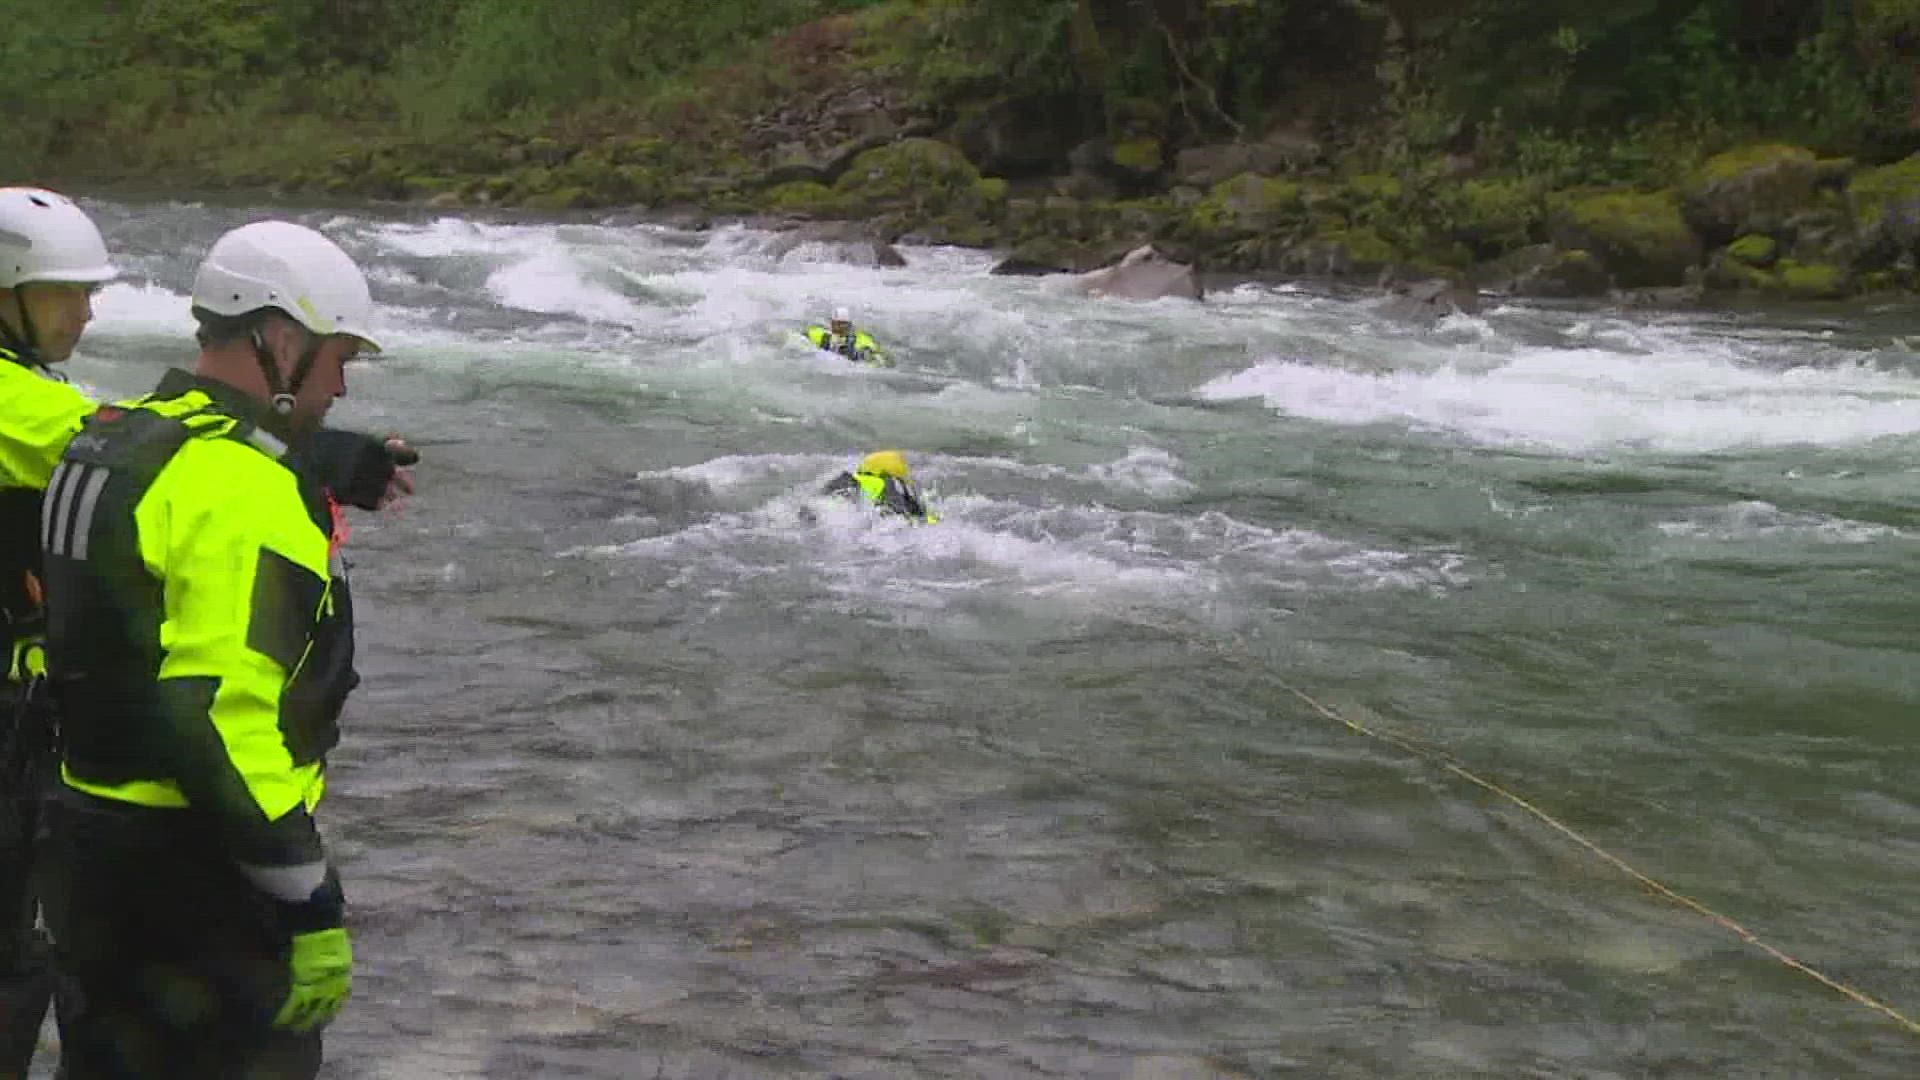 There were at least three deaths along the Skykomish River, alone, last year.